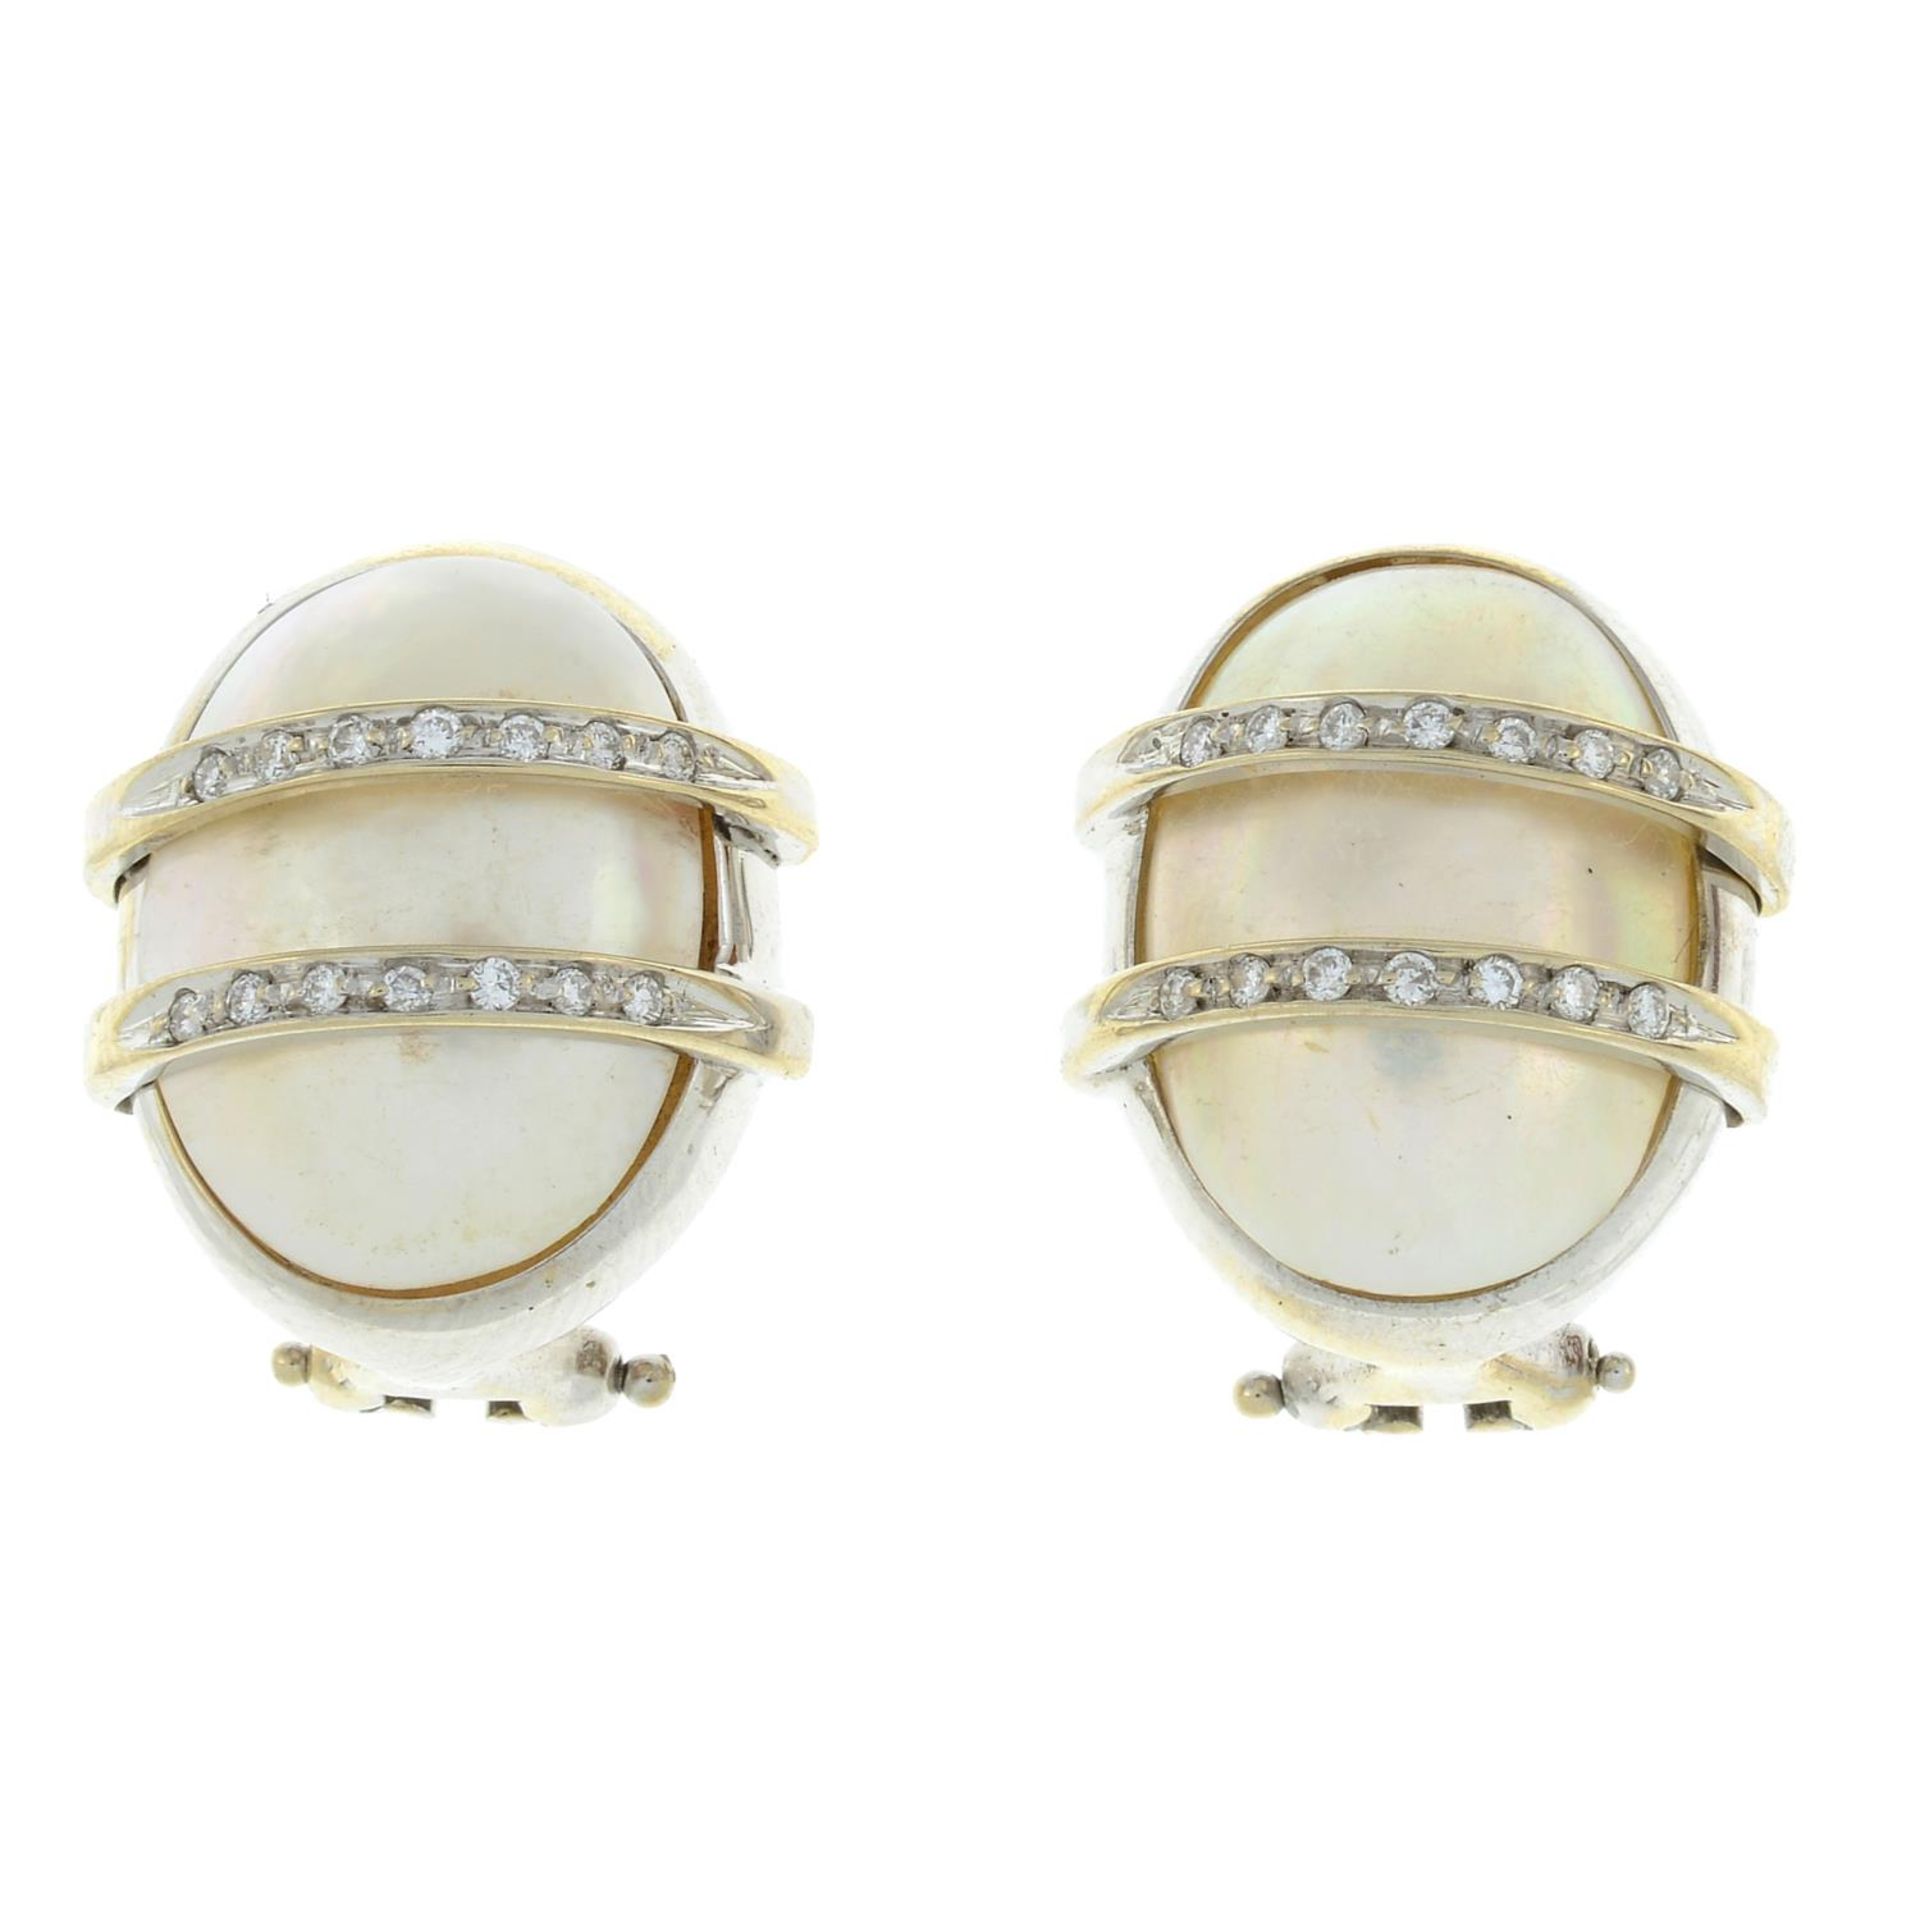 A pair of mabe pearl and diamond earrings.Estimated total diamond weight 0.15ct.